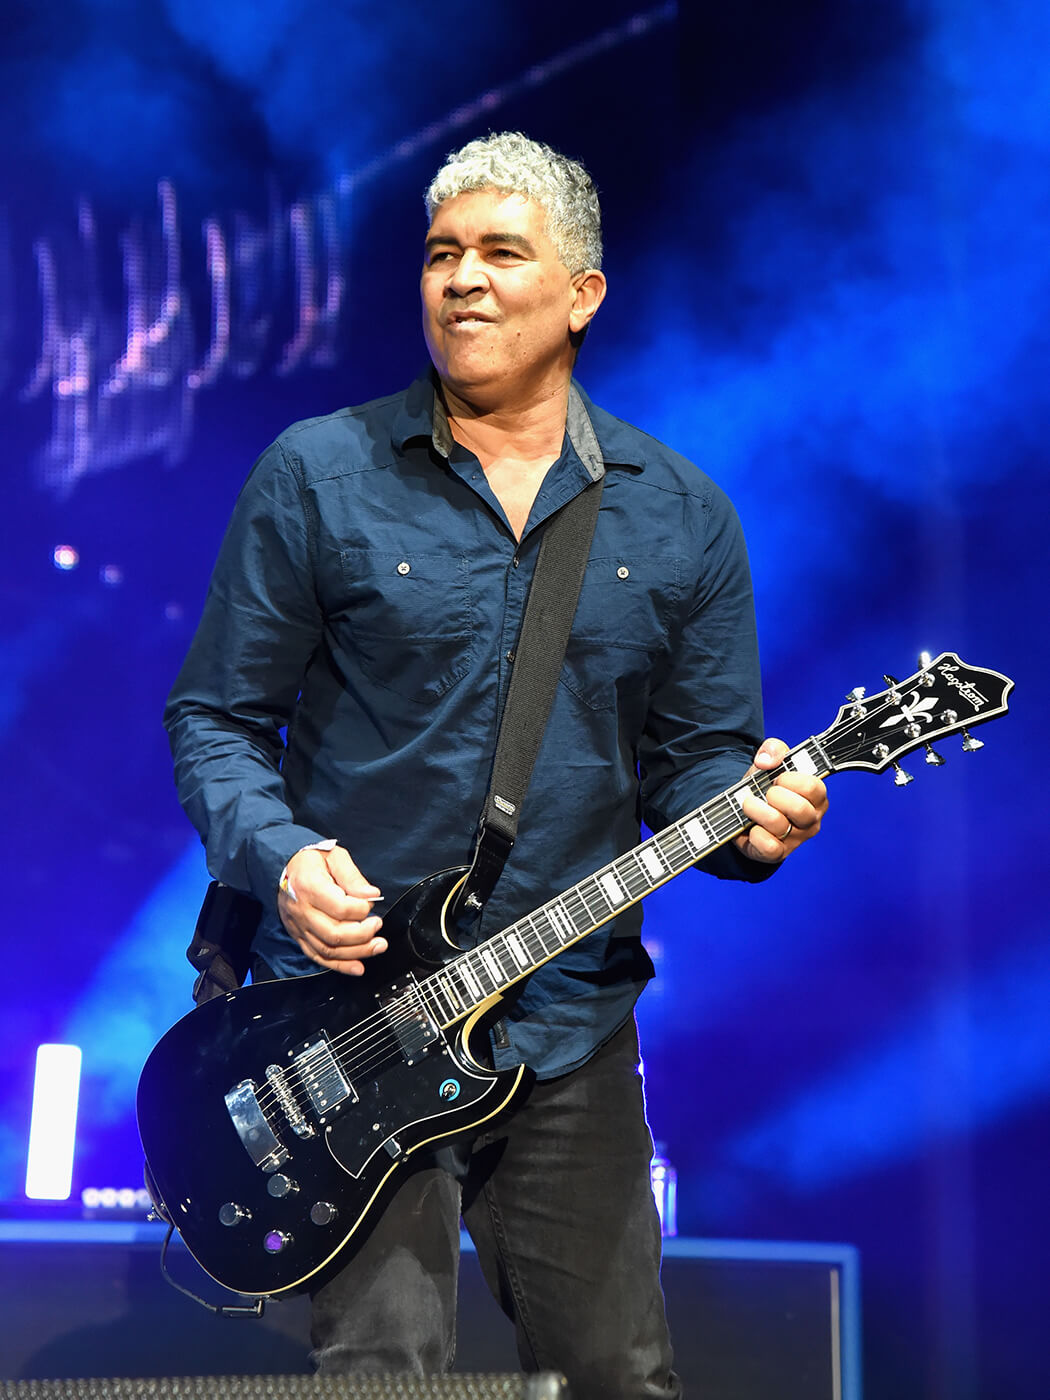 Pat Smear performing in 2014 with a Hagstrom guitar, photo by Jeff Kravitz/FilmMagic via Getty Images